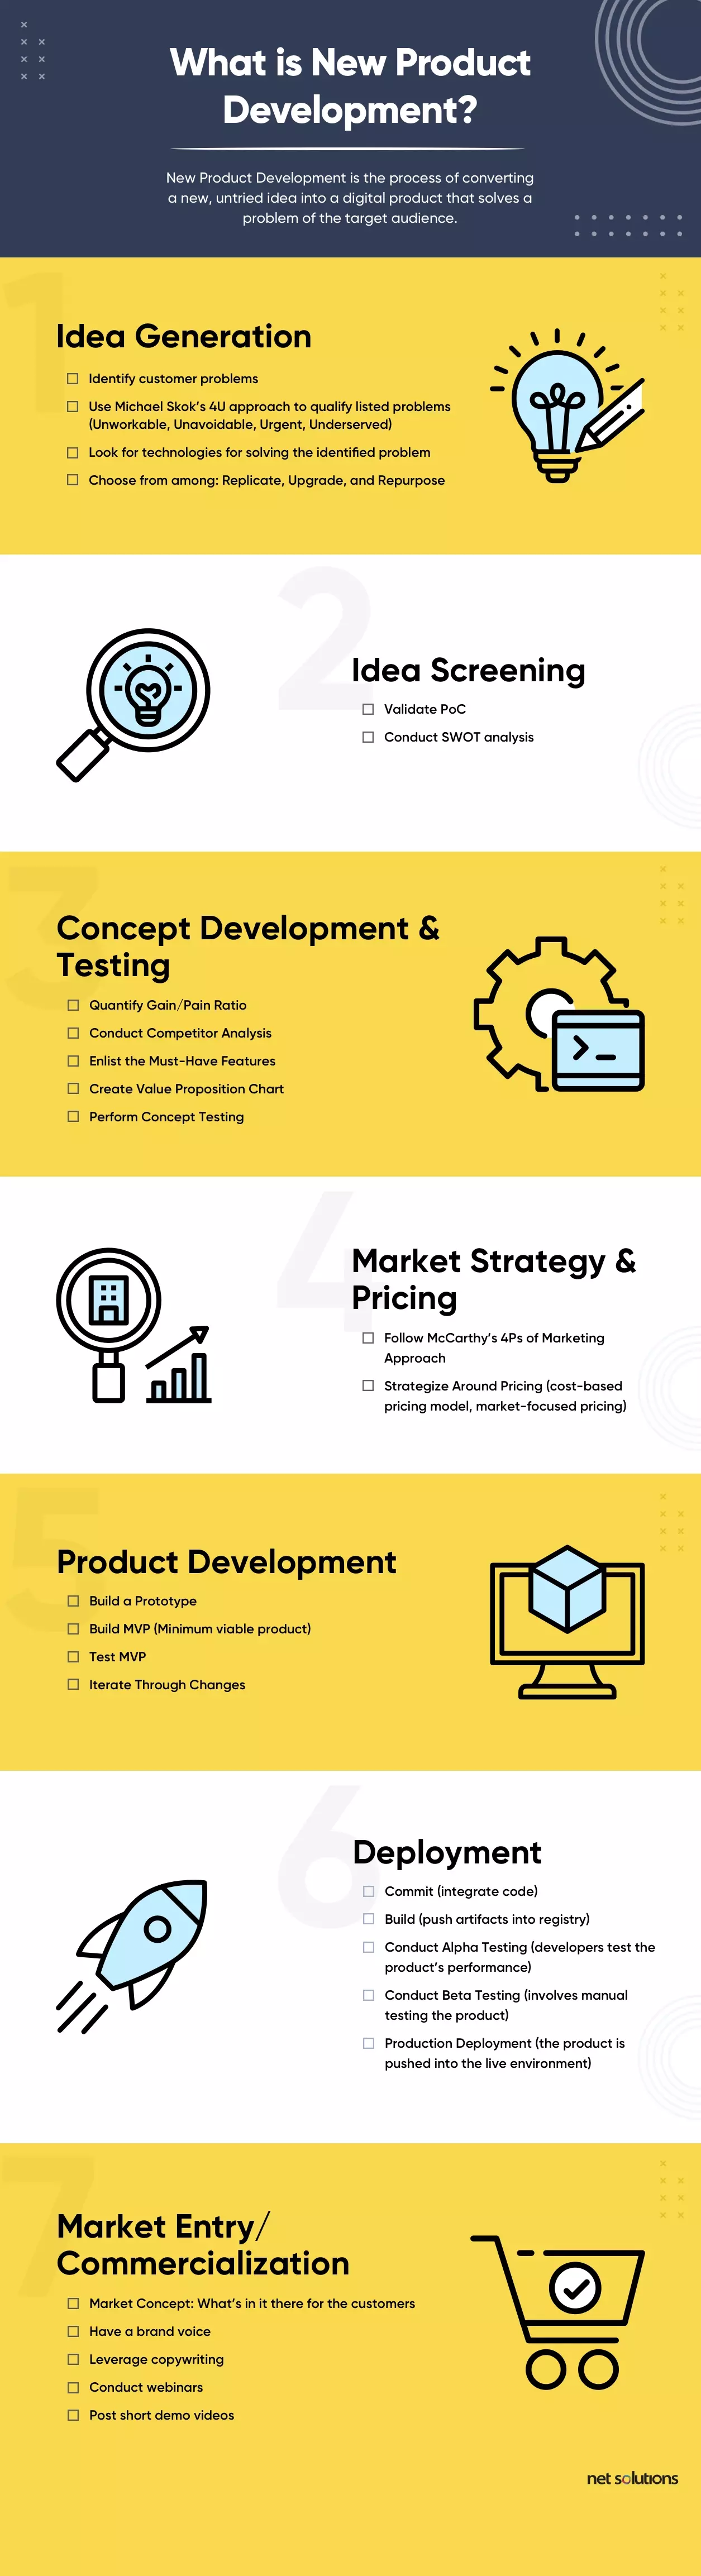 7 the New Product Development Process